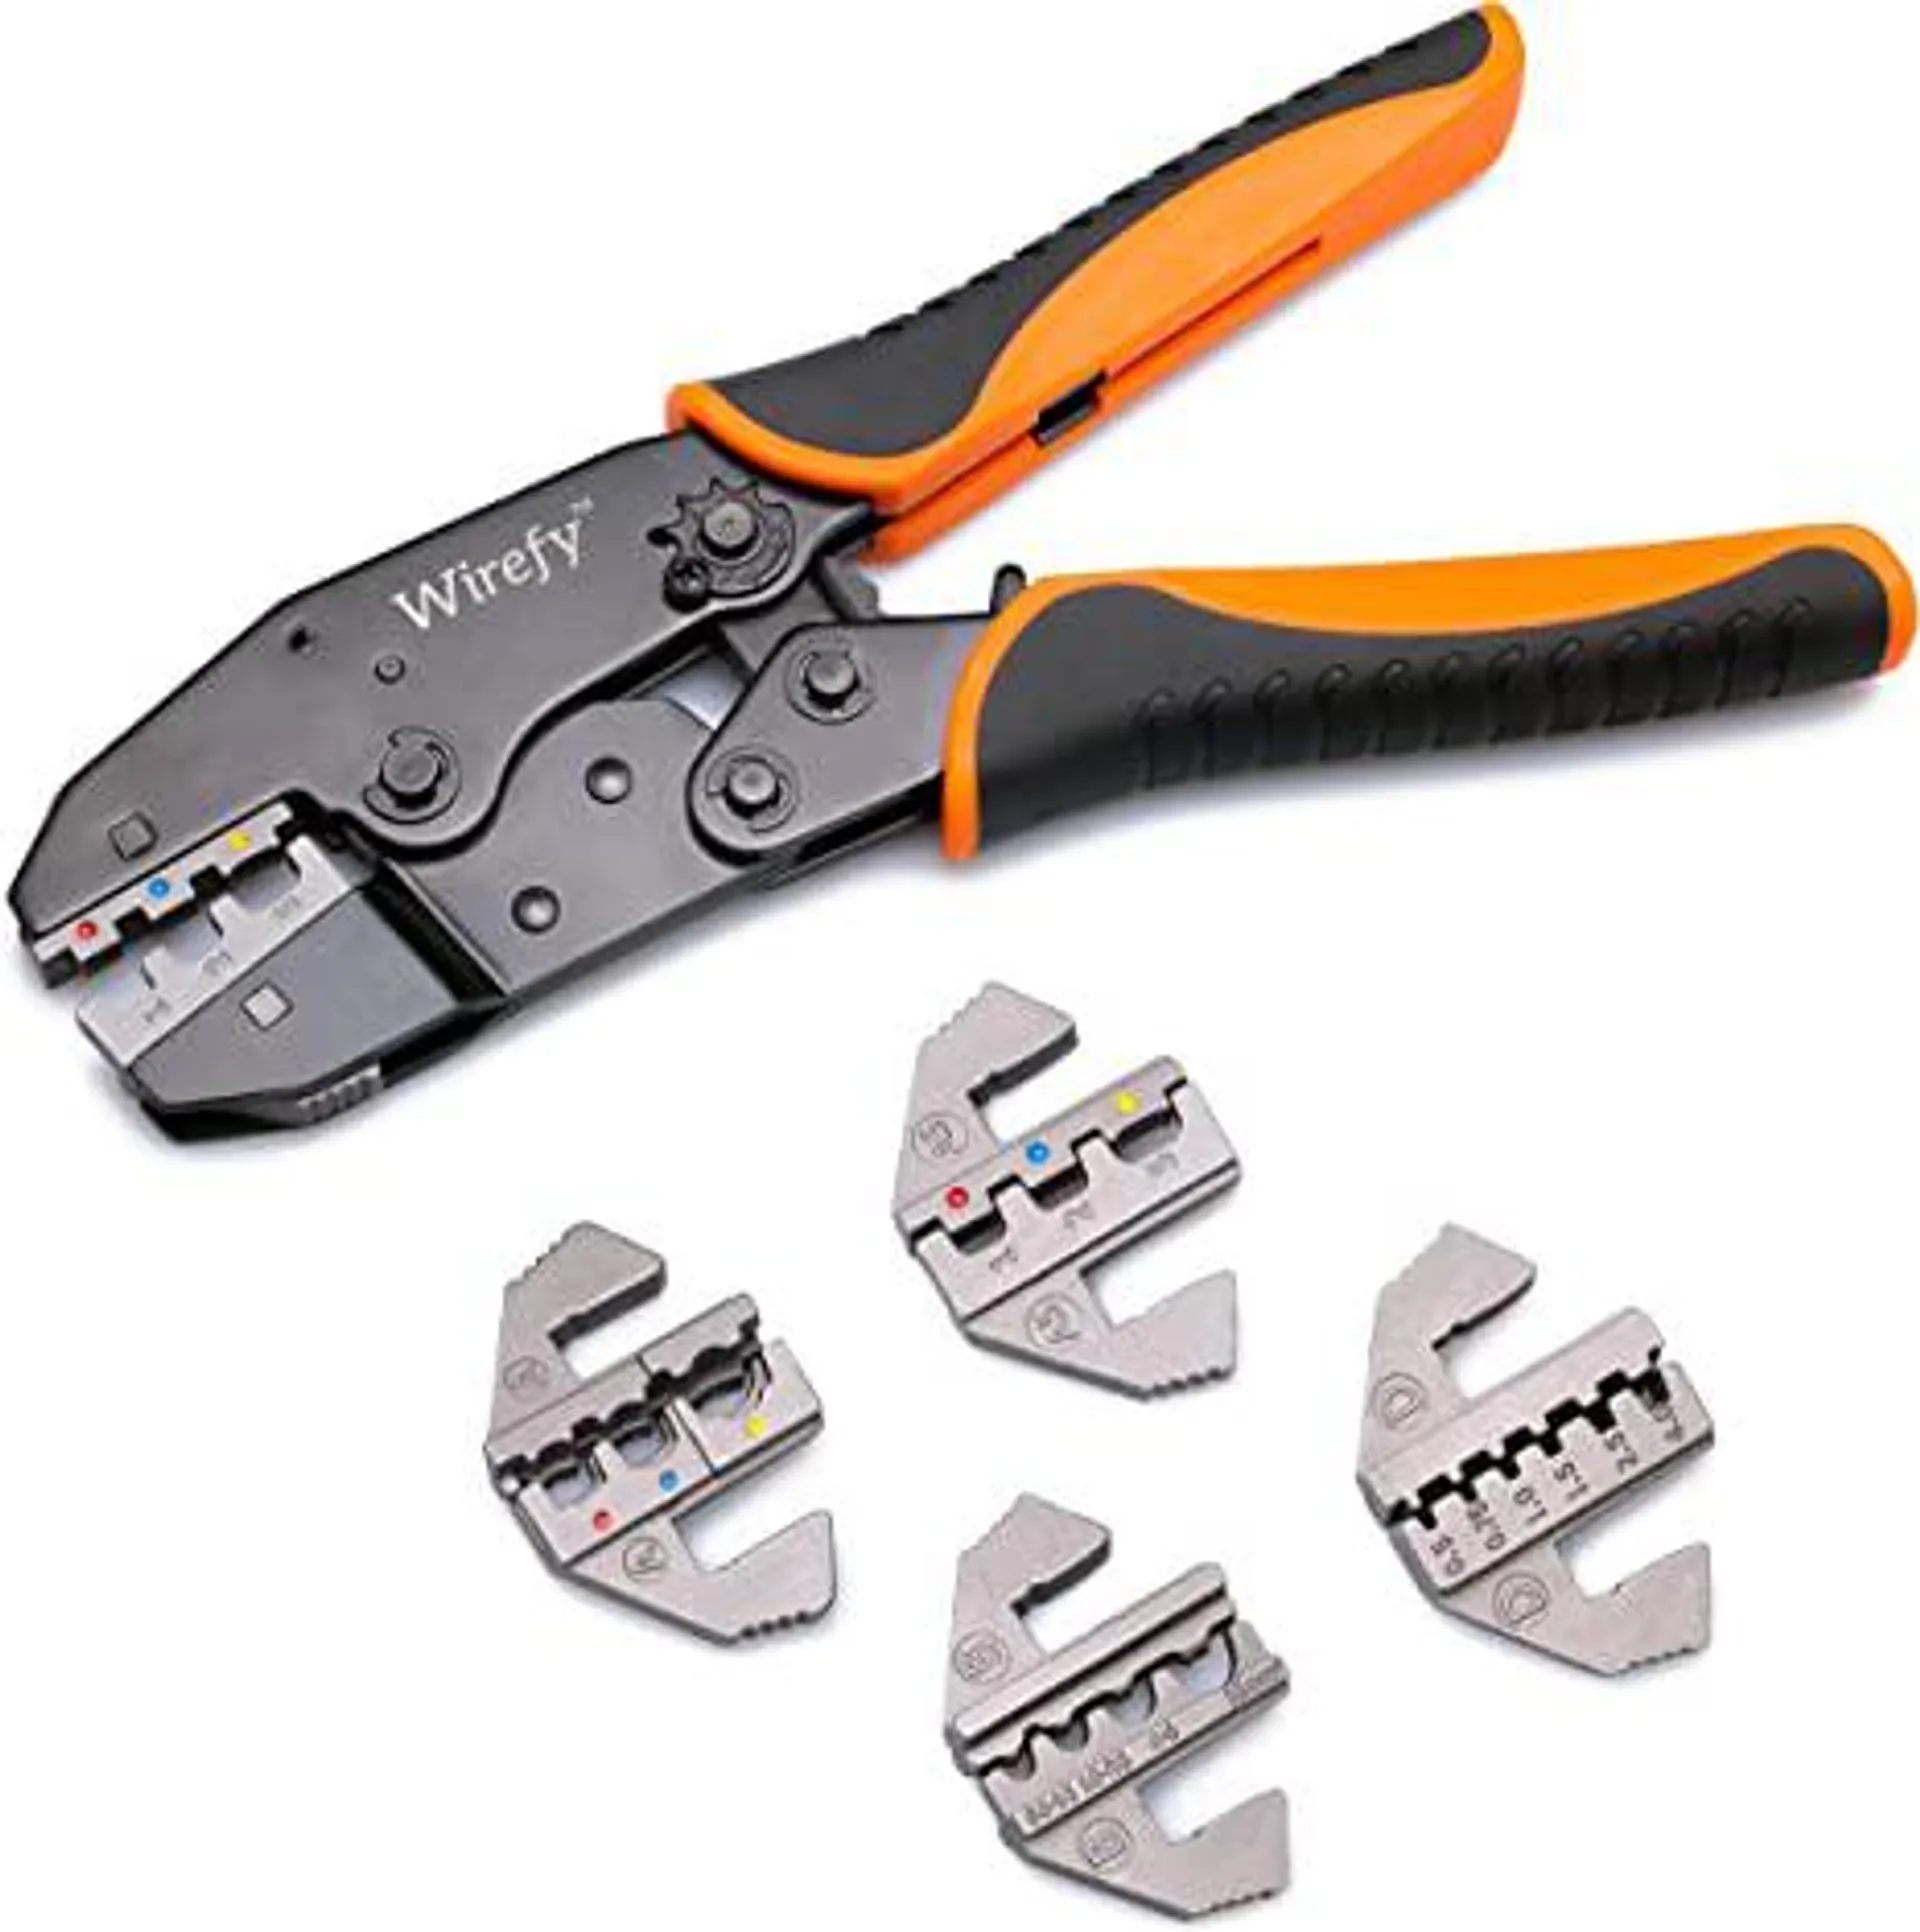 Wirefy Crimping Tool Set 5 PCS - Ratcheting Wire Crimper - For Heat Shrink, Nylon, Non-Insulated Connectors, Ferrule Terminals